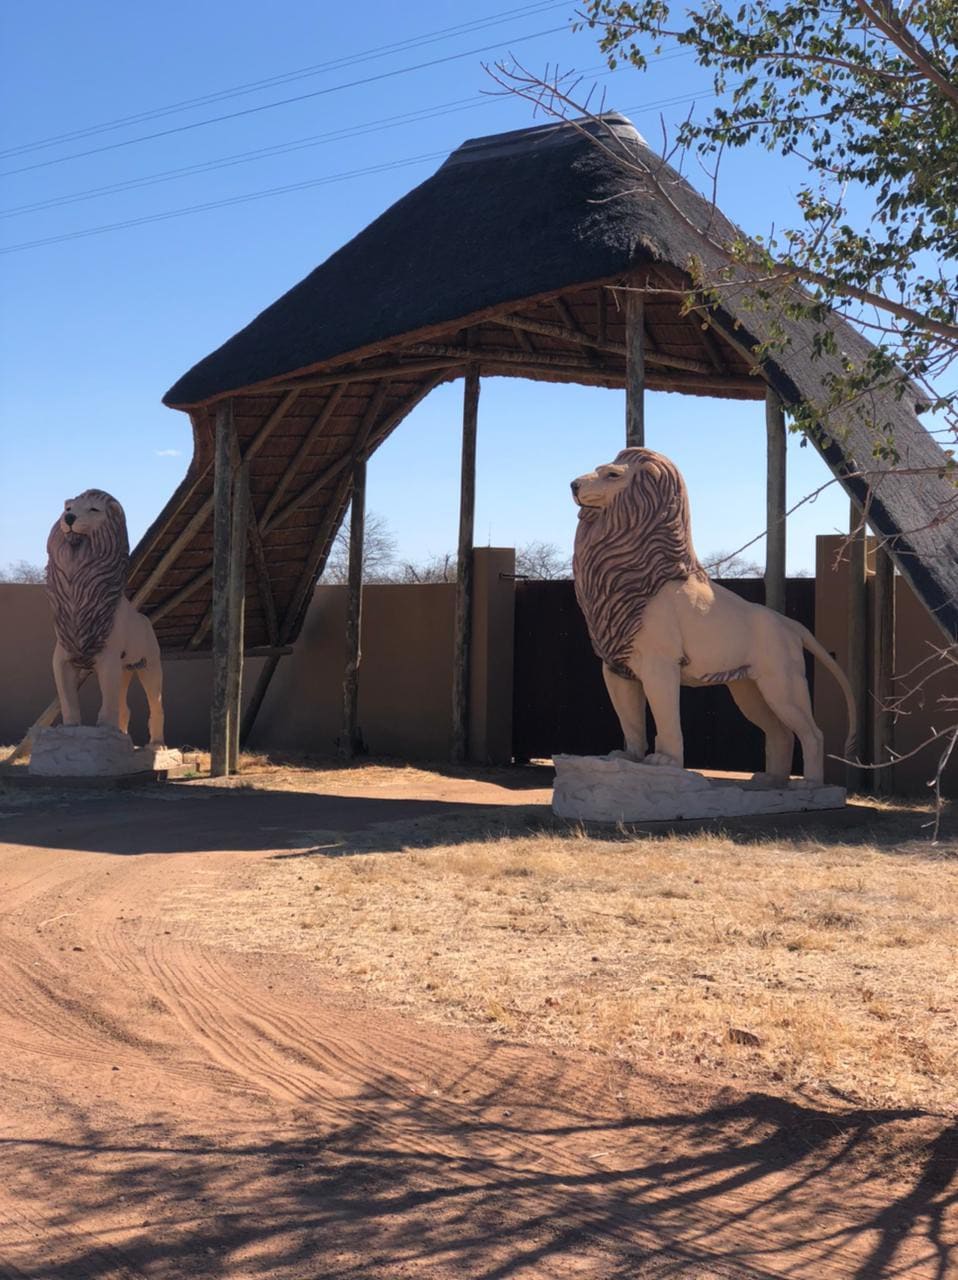 Lodge with roaring lions.